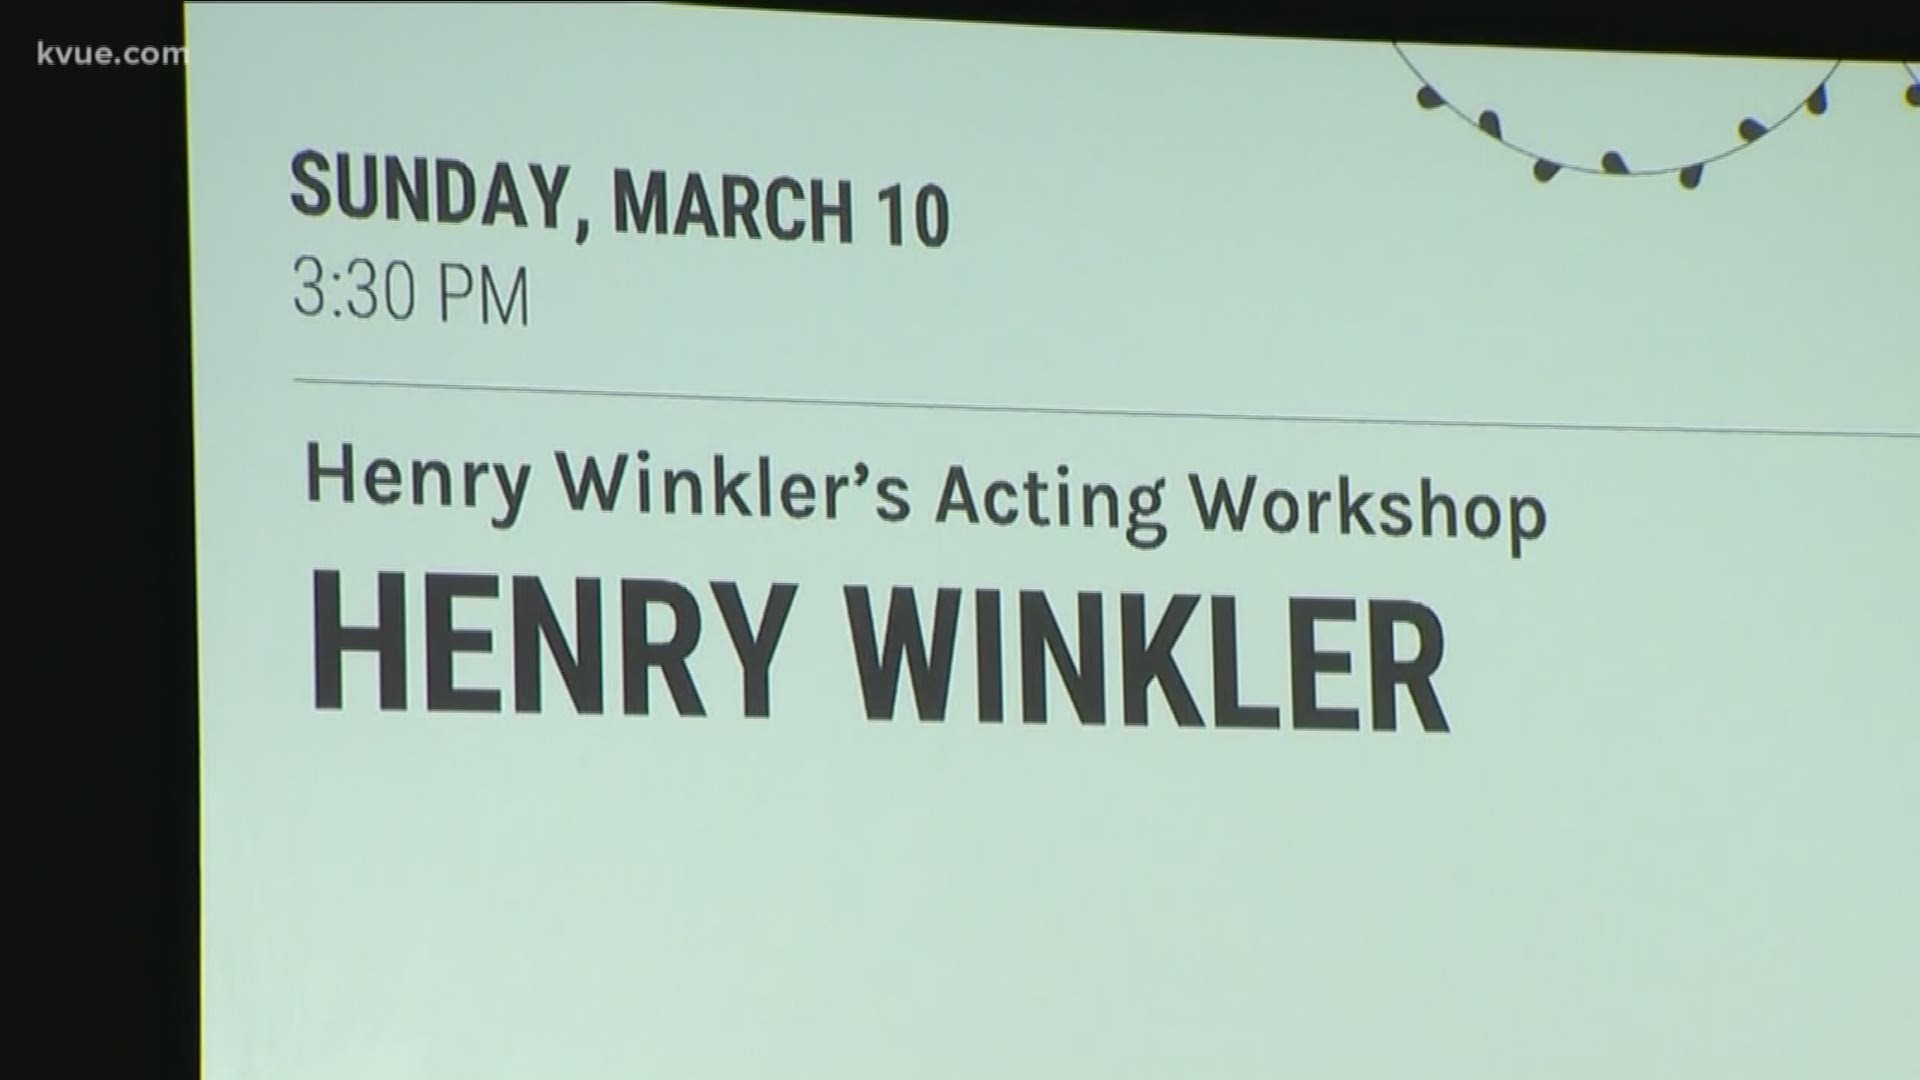 One of the big names in town Sunday was Henry Winkler.